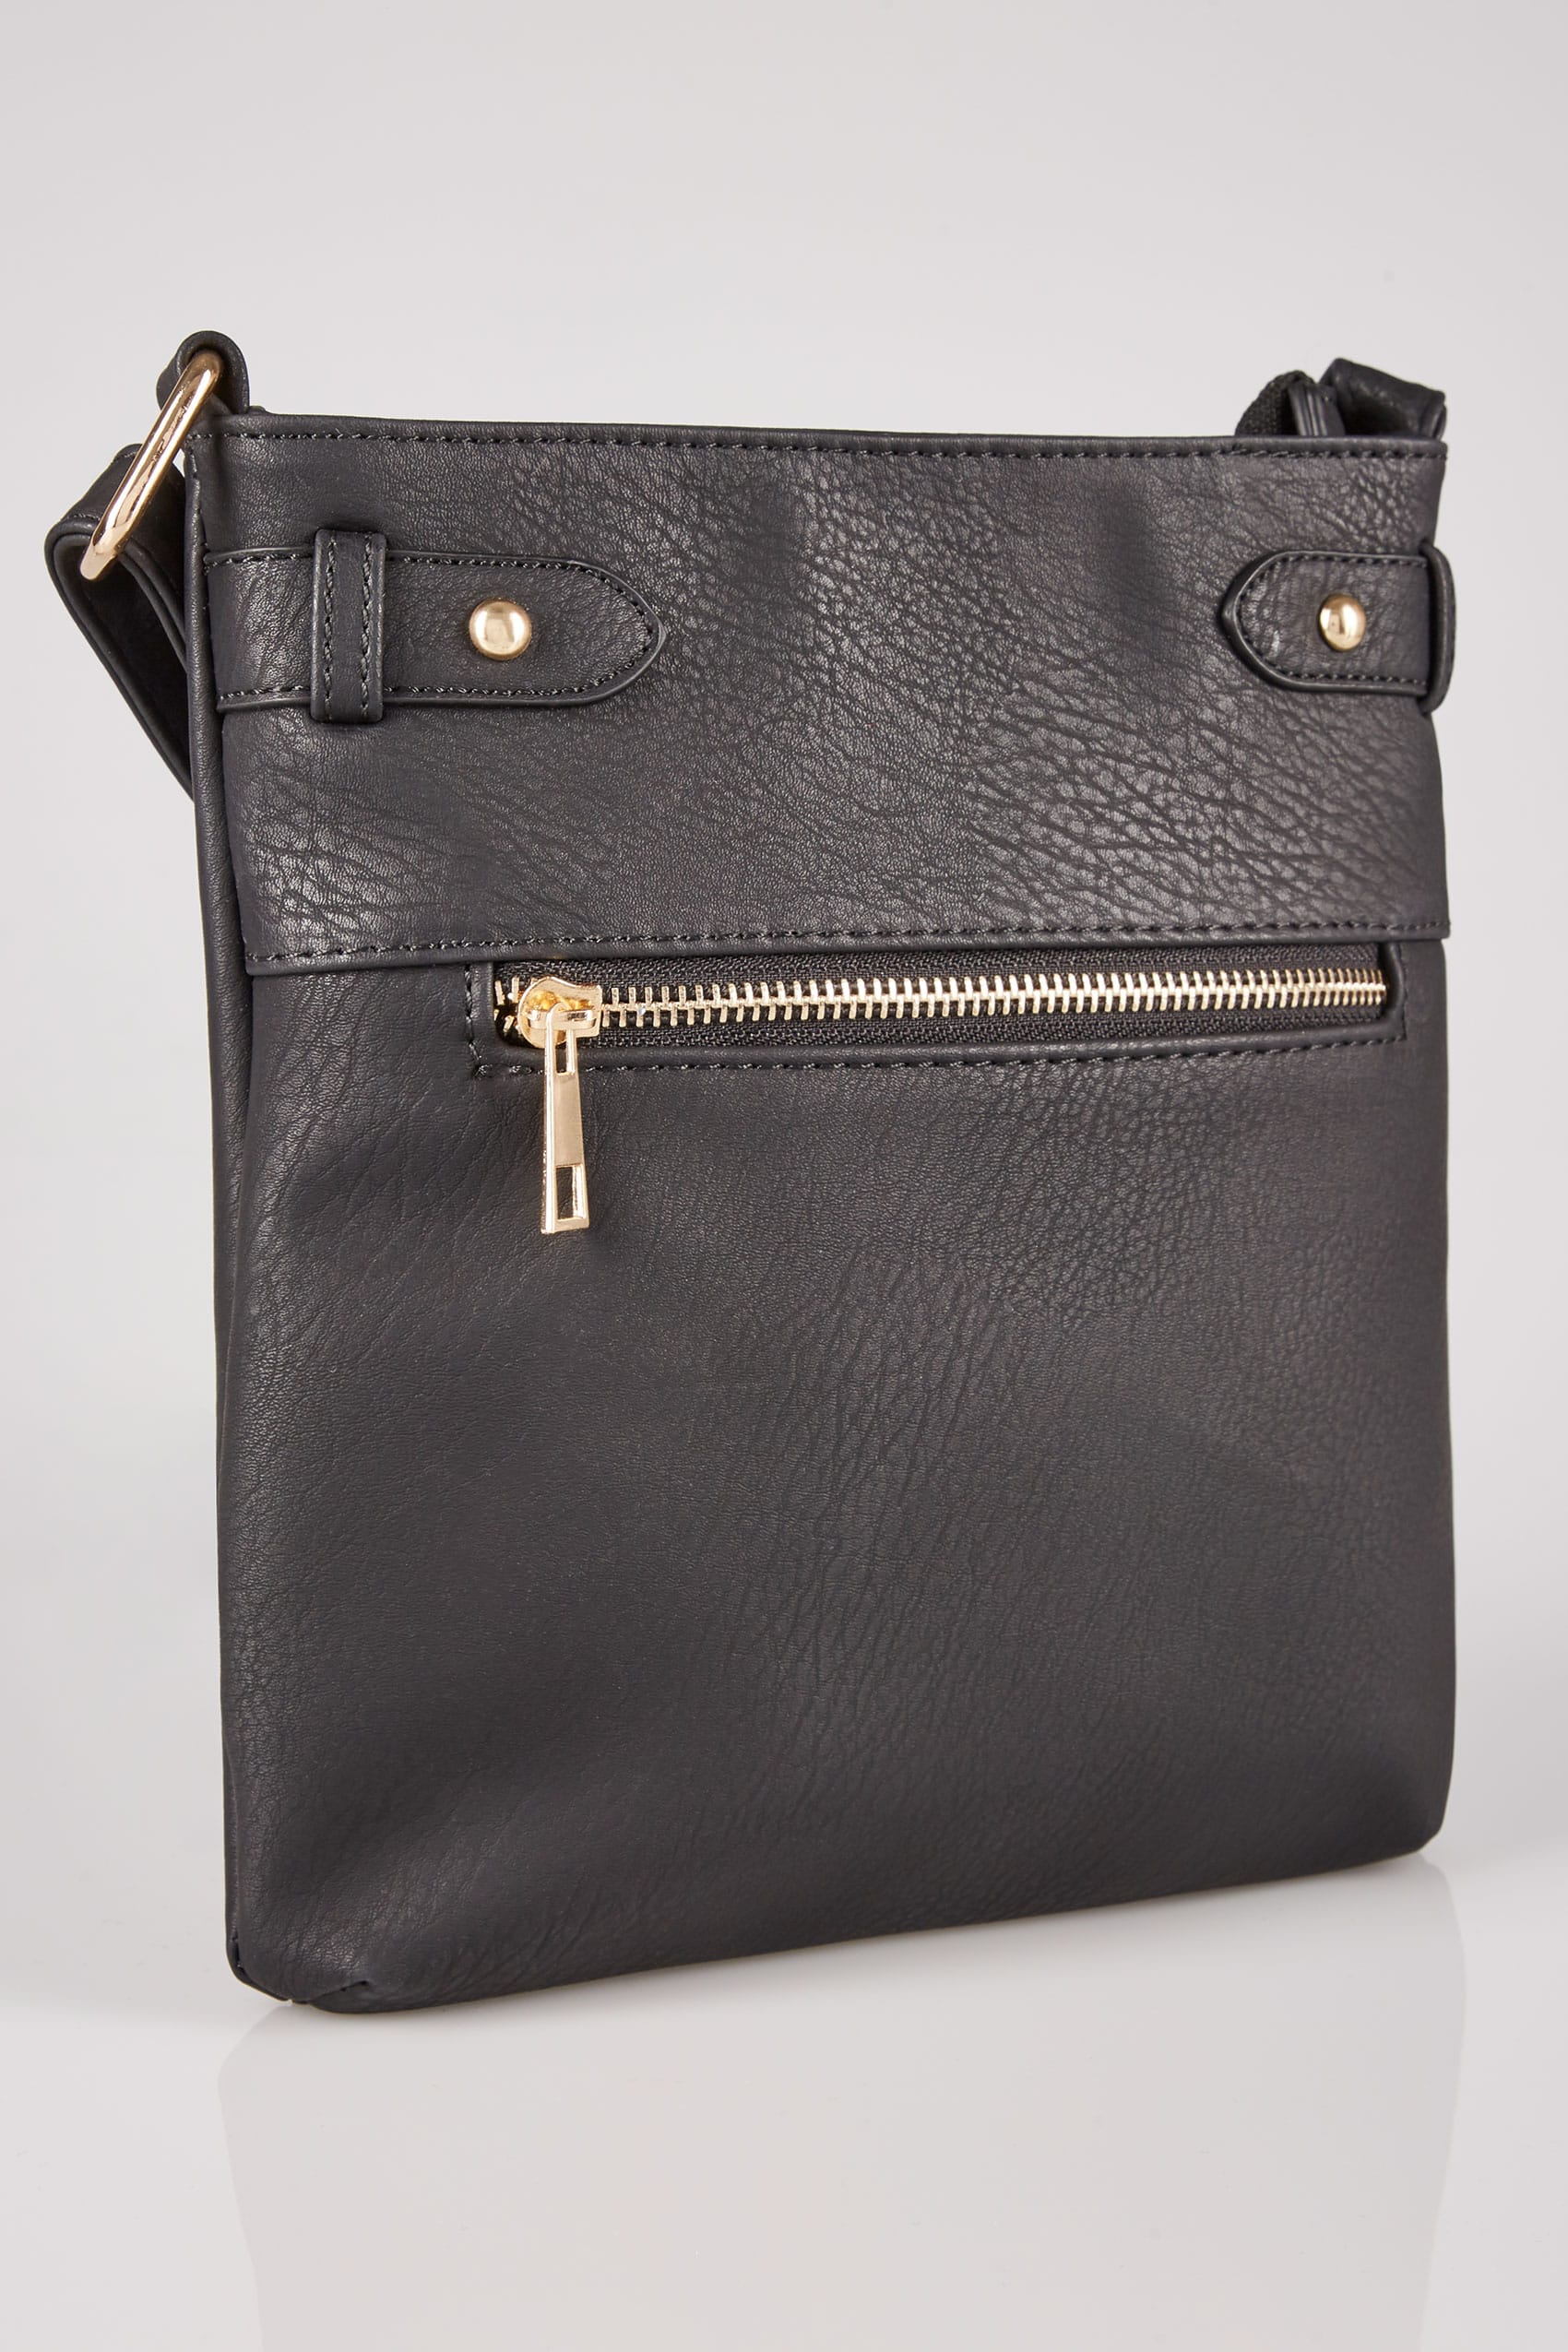 Black Cross Body Bag With Zip Front & Extended Strap